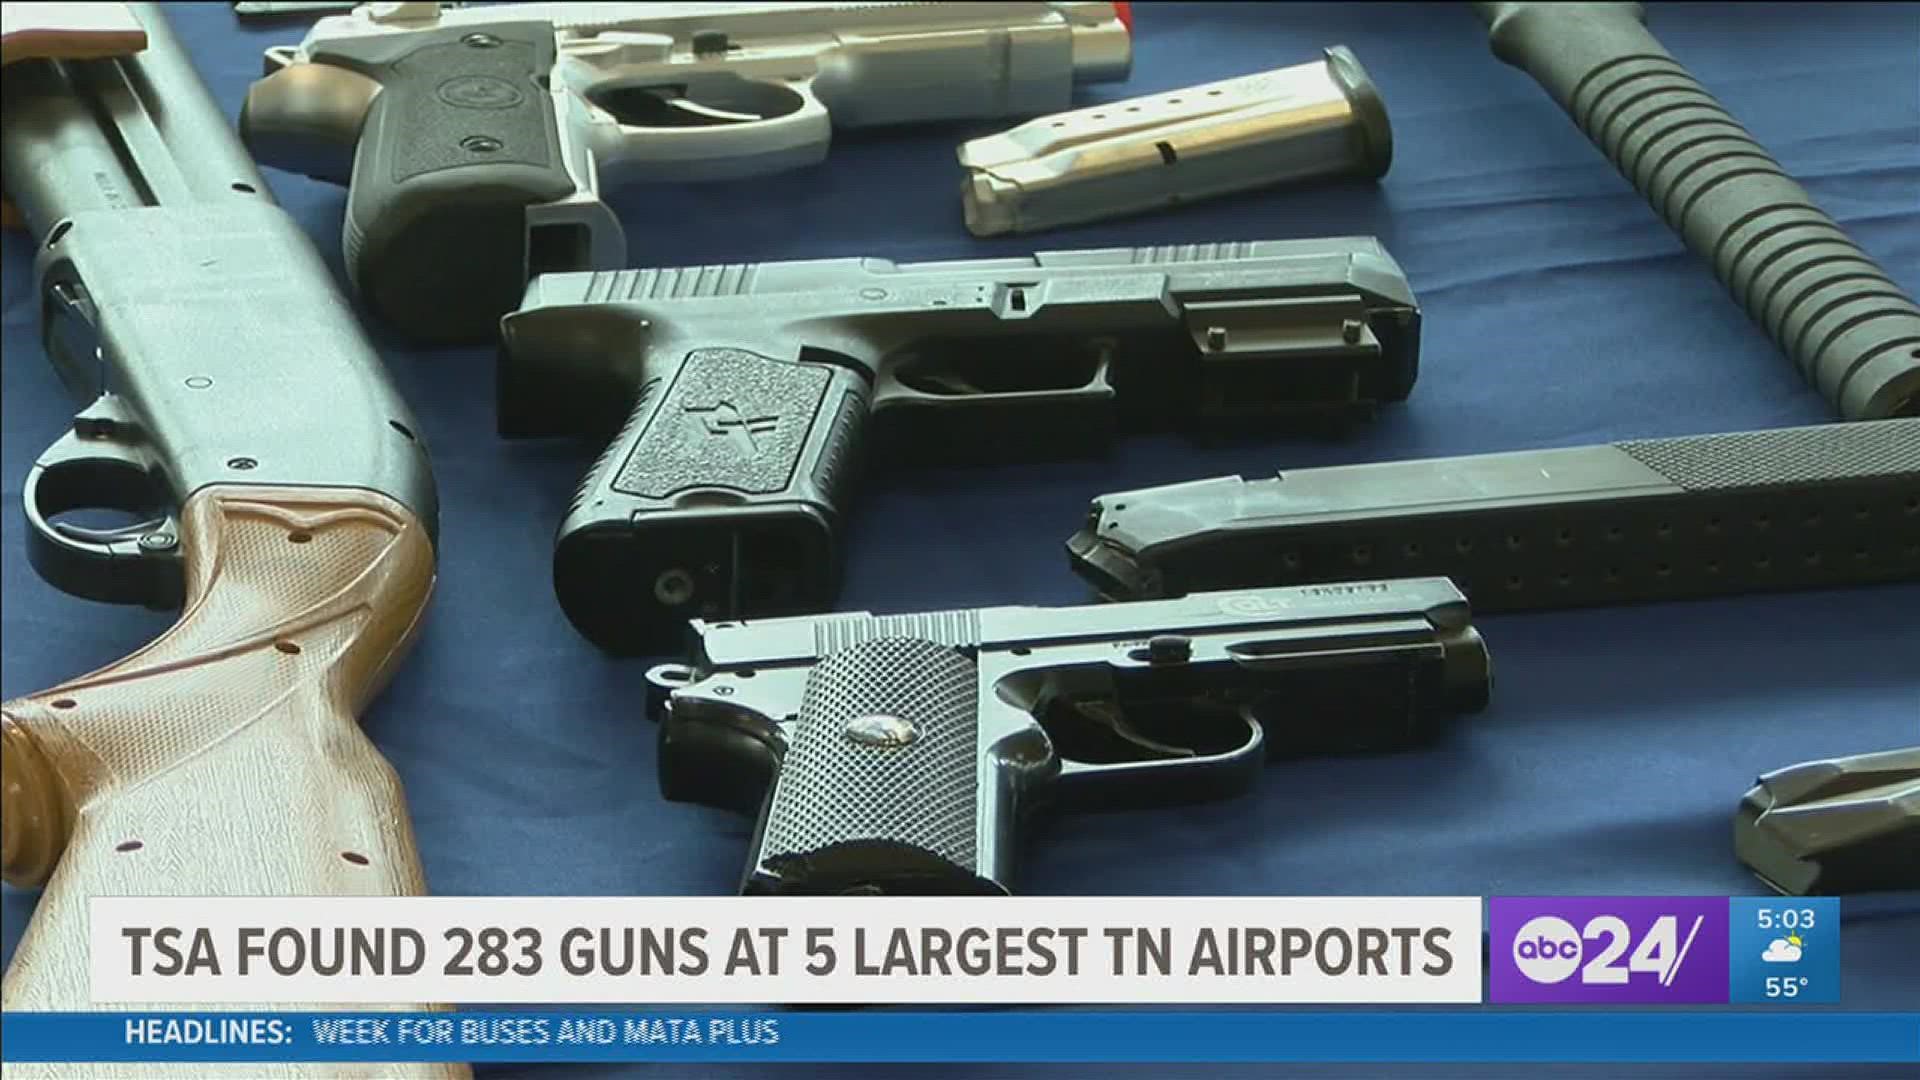 Nashville International Airport broke a statewide record with 163 guns found, a total higher than the sum of all Tennessee airports combined in 2020.